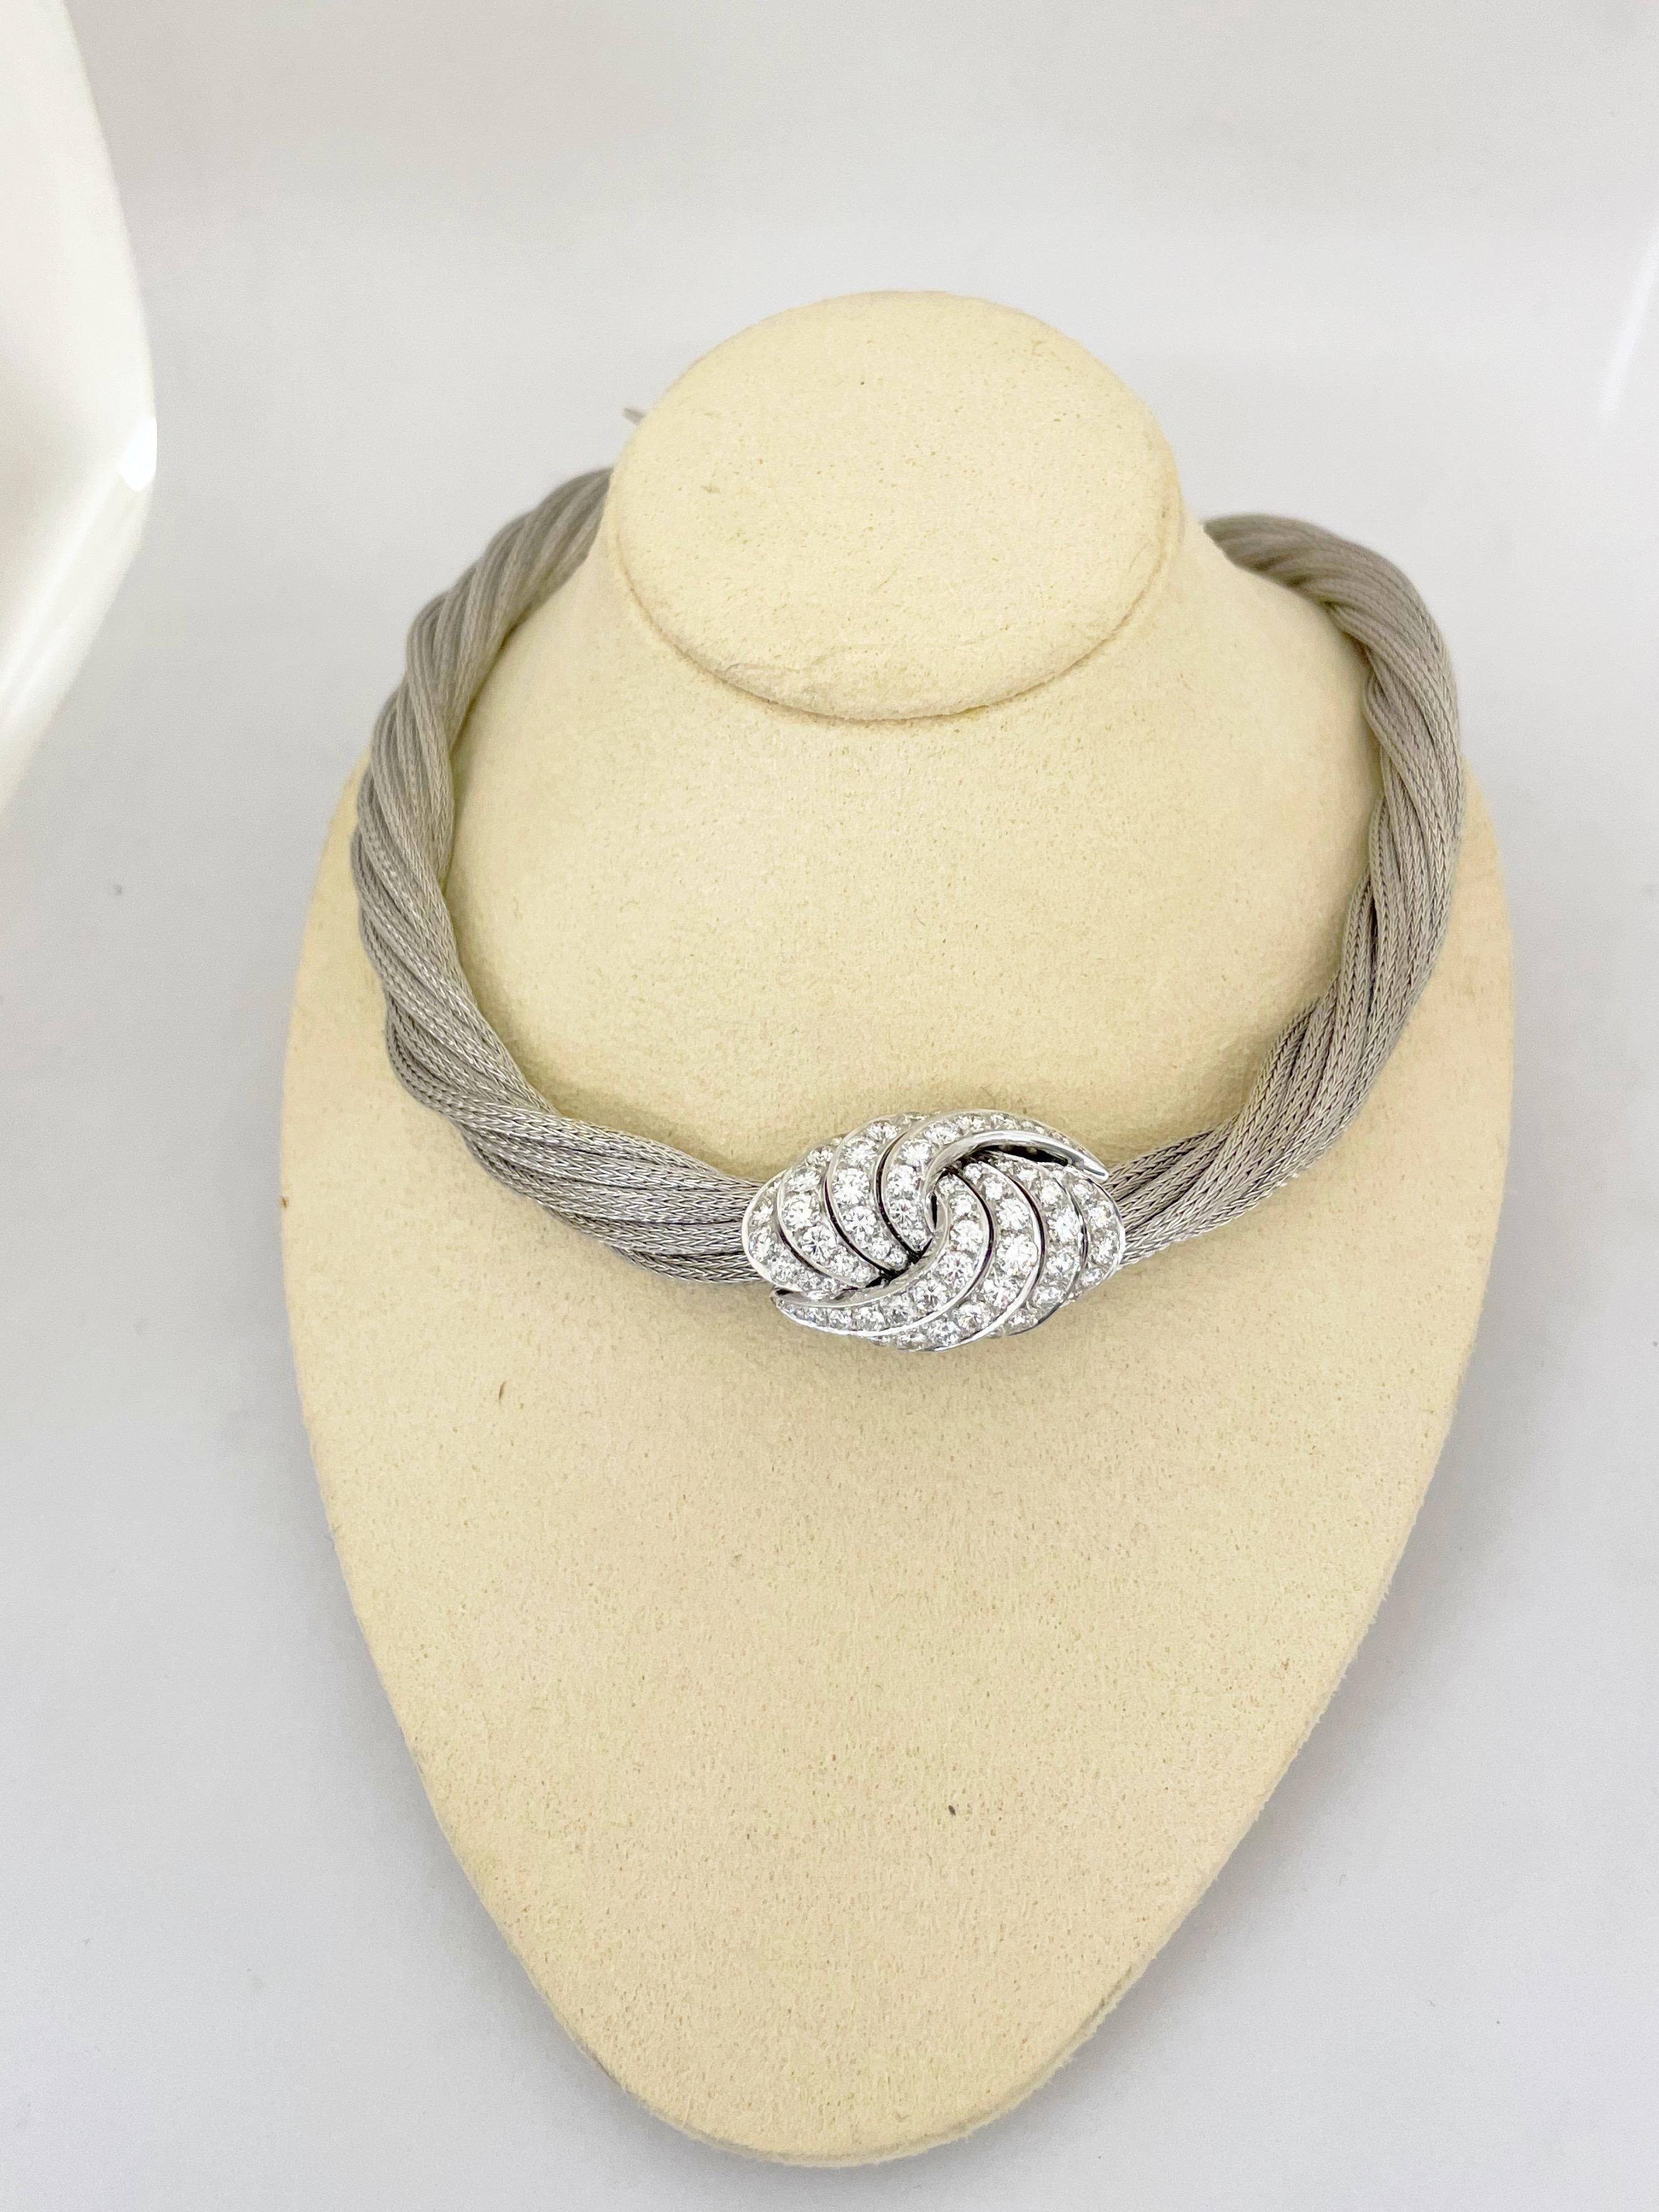 Picchiotti 18 Karat Gold Twist Choker Necklace 2.56 Carat Swirl Diamond Center In New Condition For Sale In New York, NY